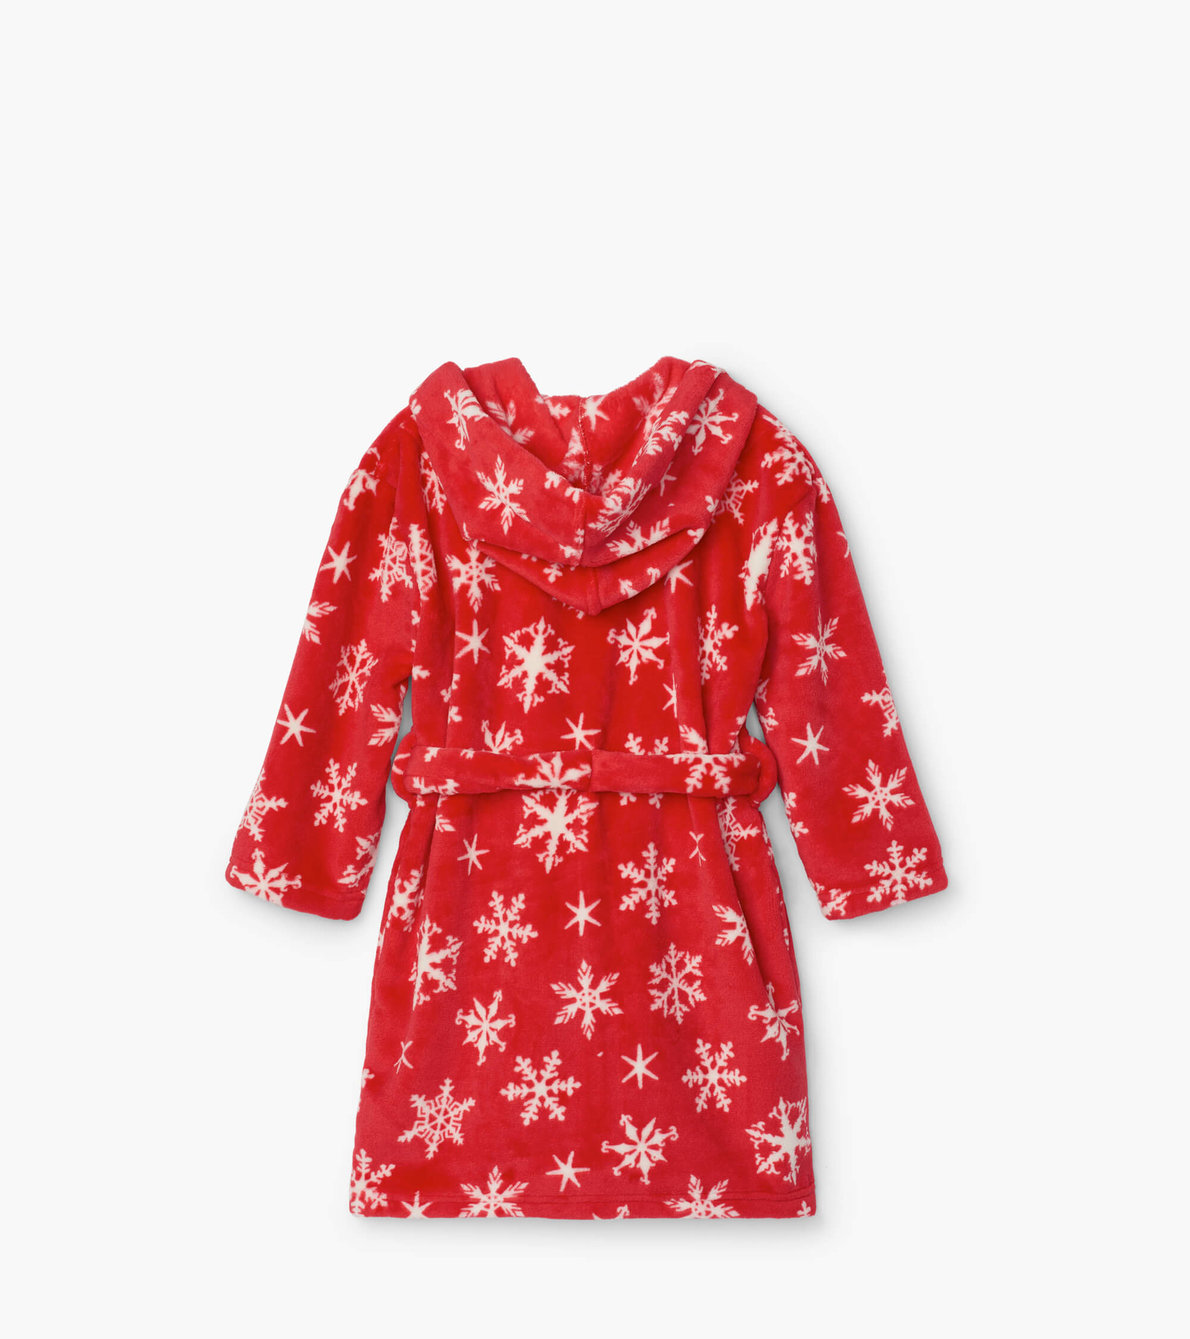 View larger image of Holiday Snowflakes Fleece Robe